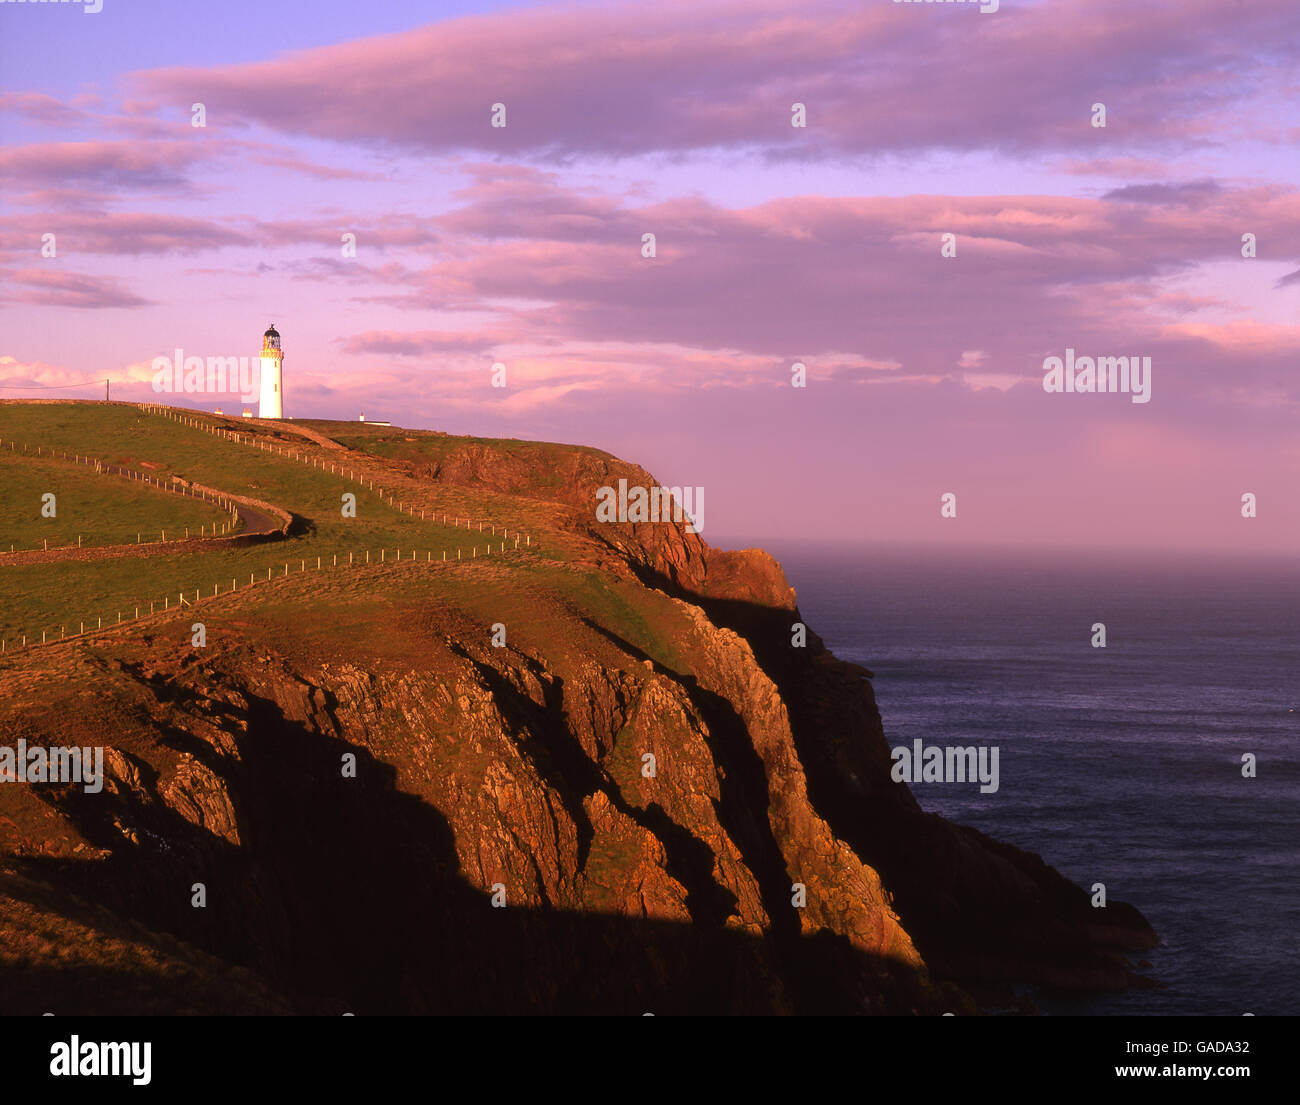 Evening light over the Mull of Galloway Lighthouse, Wigtownshire, Dumfries & Galloway. Stock Photo